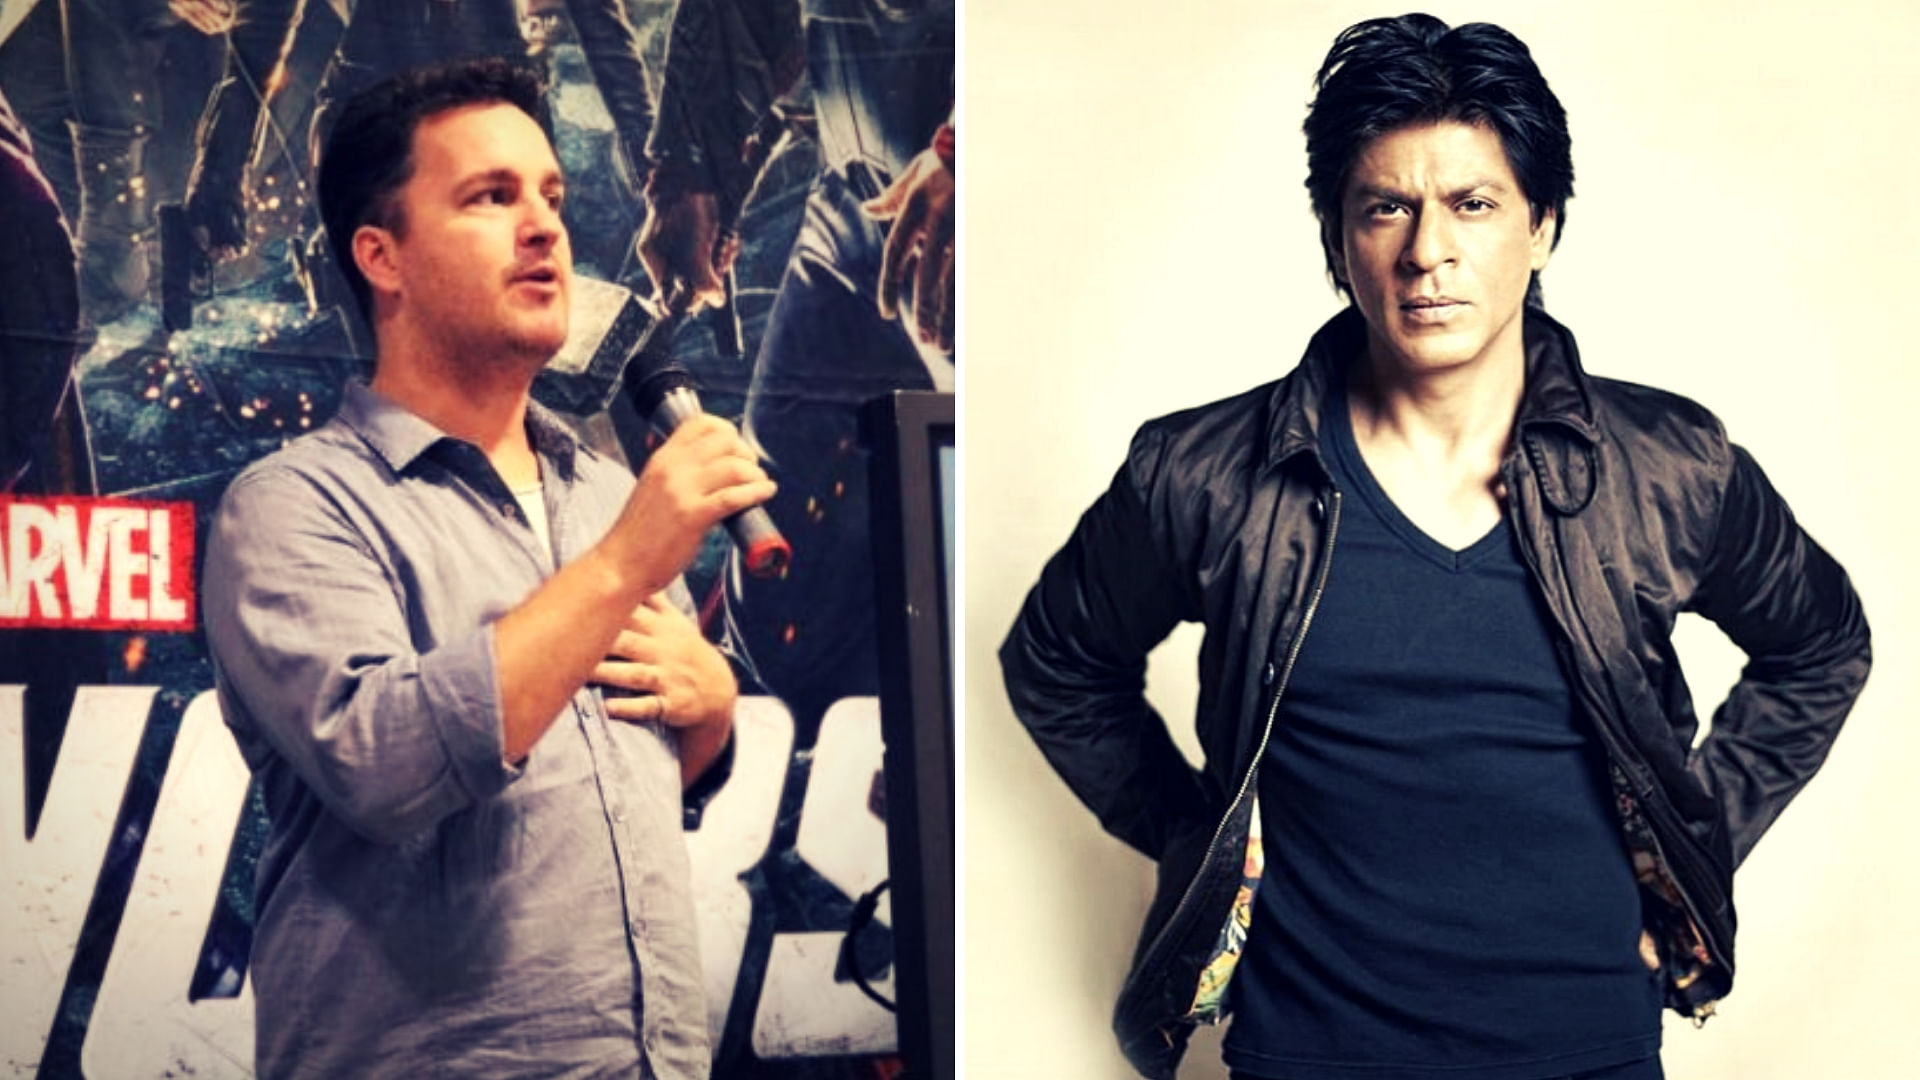 “If we make Indian content, we have to put Shah Rukh Khan. He has to be in it,” said Stephen Wacker.